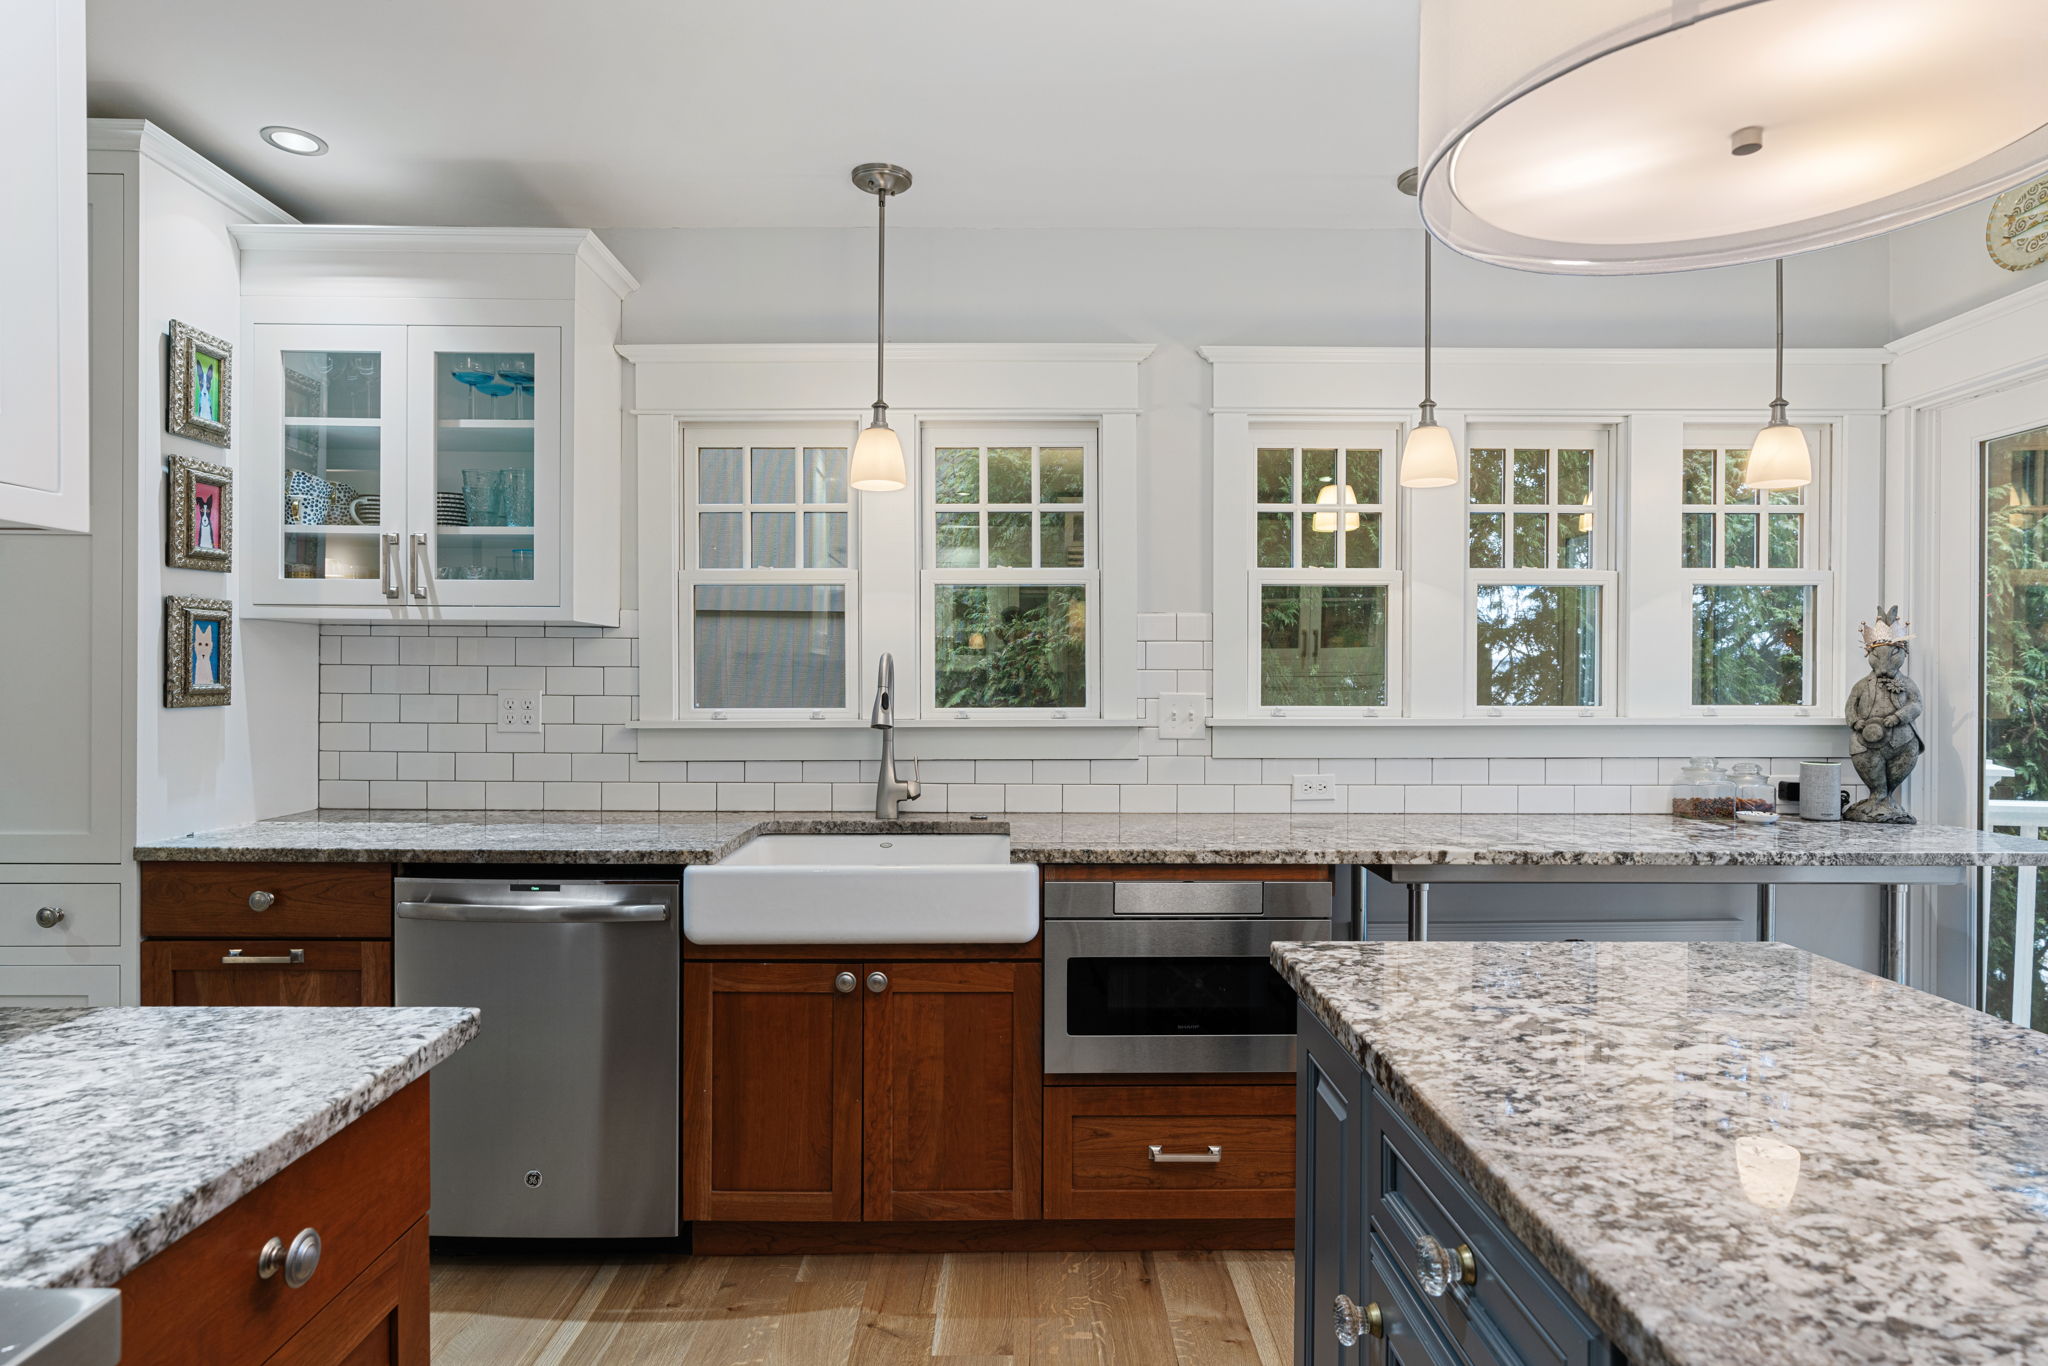 Gleaming granite countertops and stainless-steel appliances.